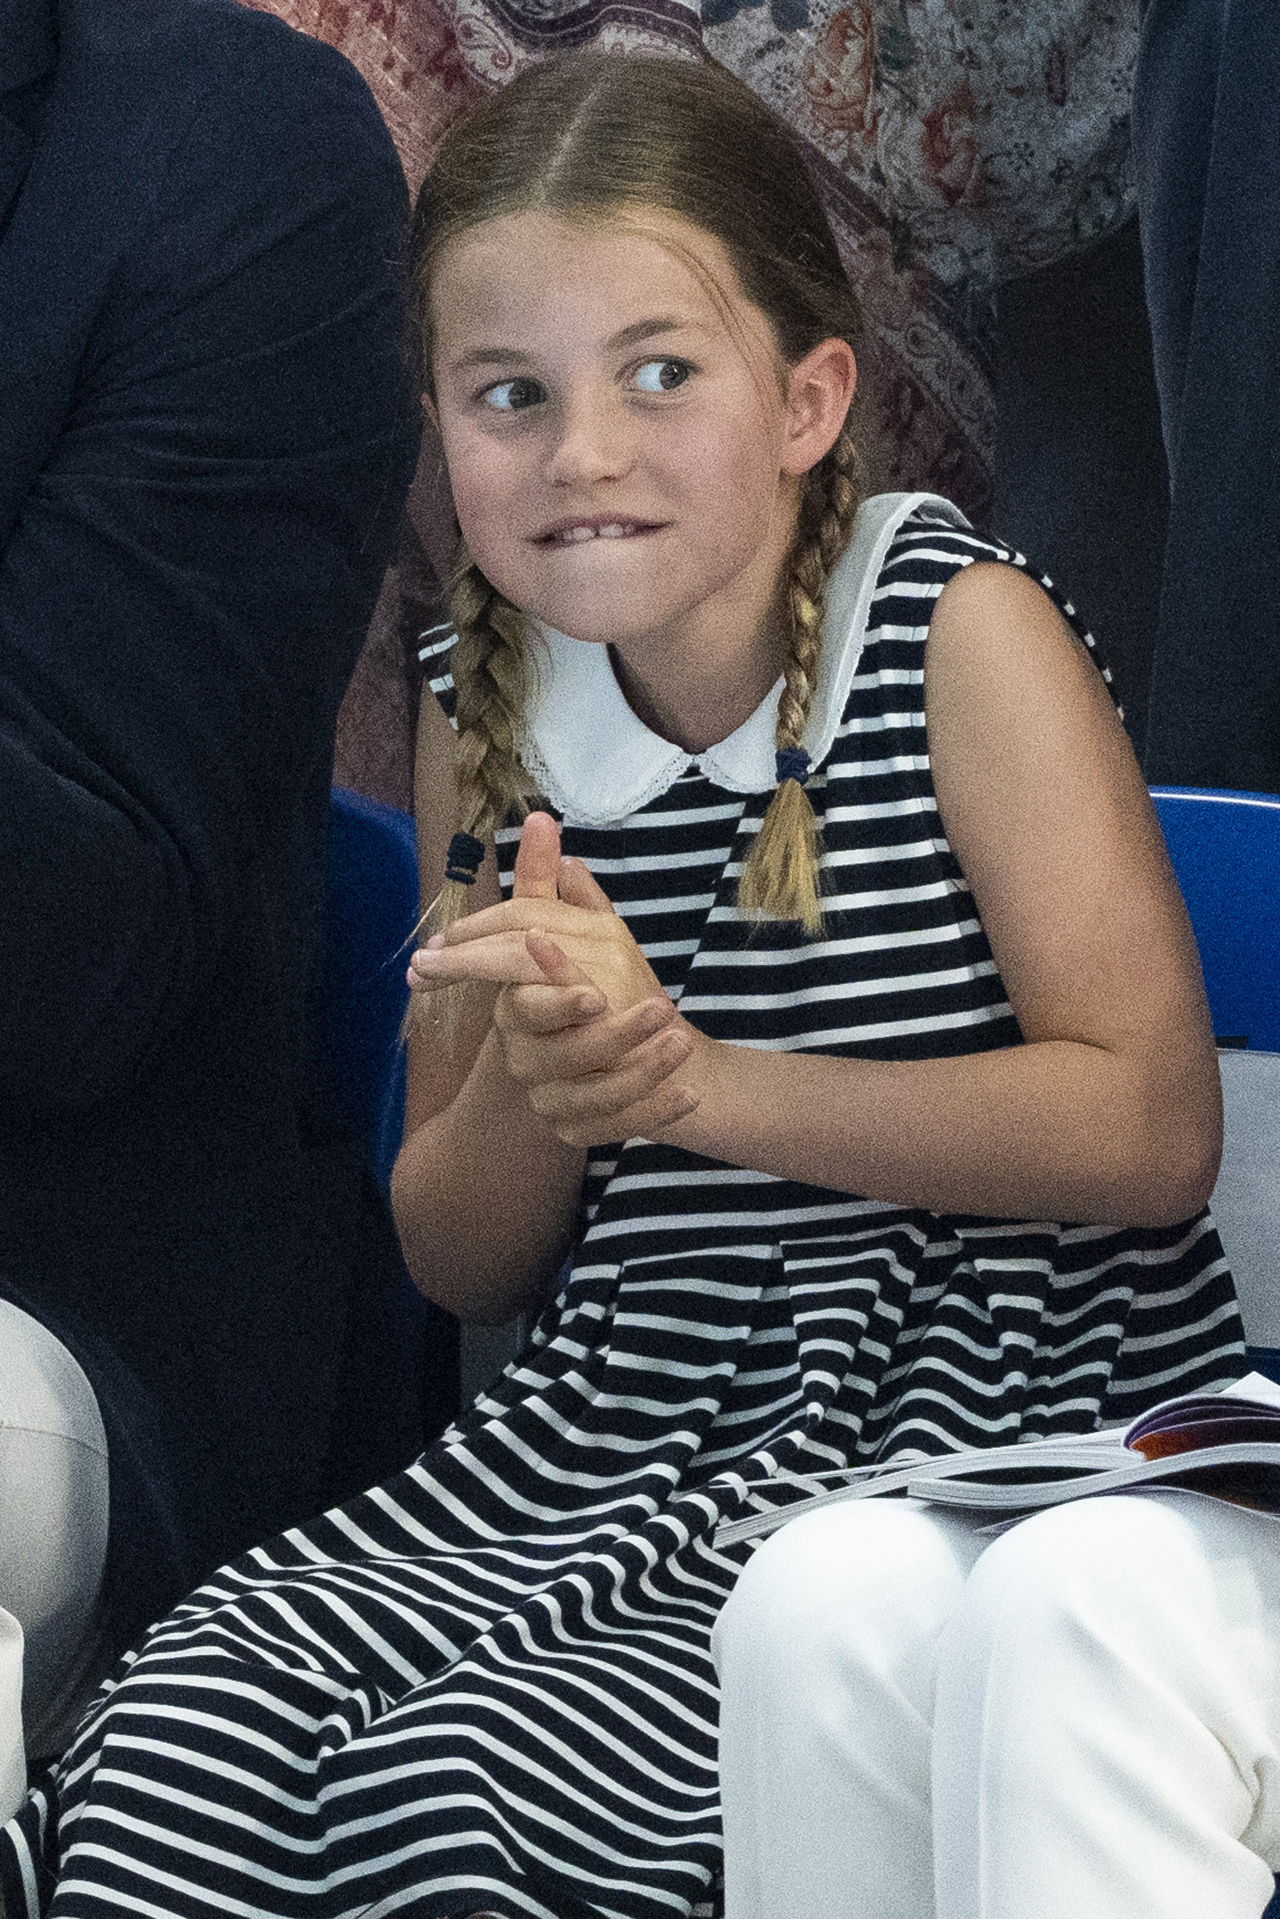 Princess Charlotte makes a funny face while sitting in the stands at the Commonwealth Games wearing a striped collared dress and braided pigtails.